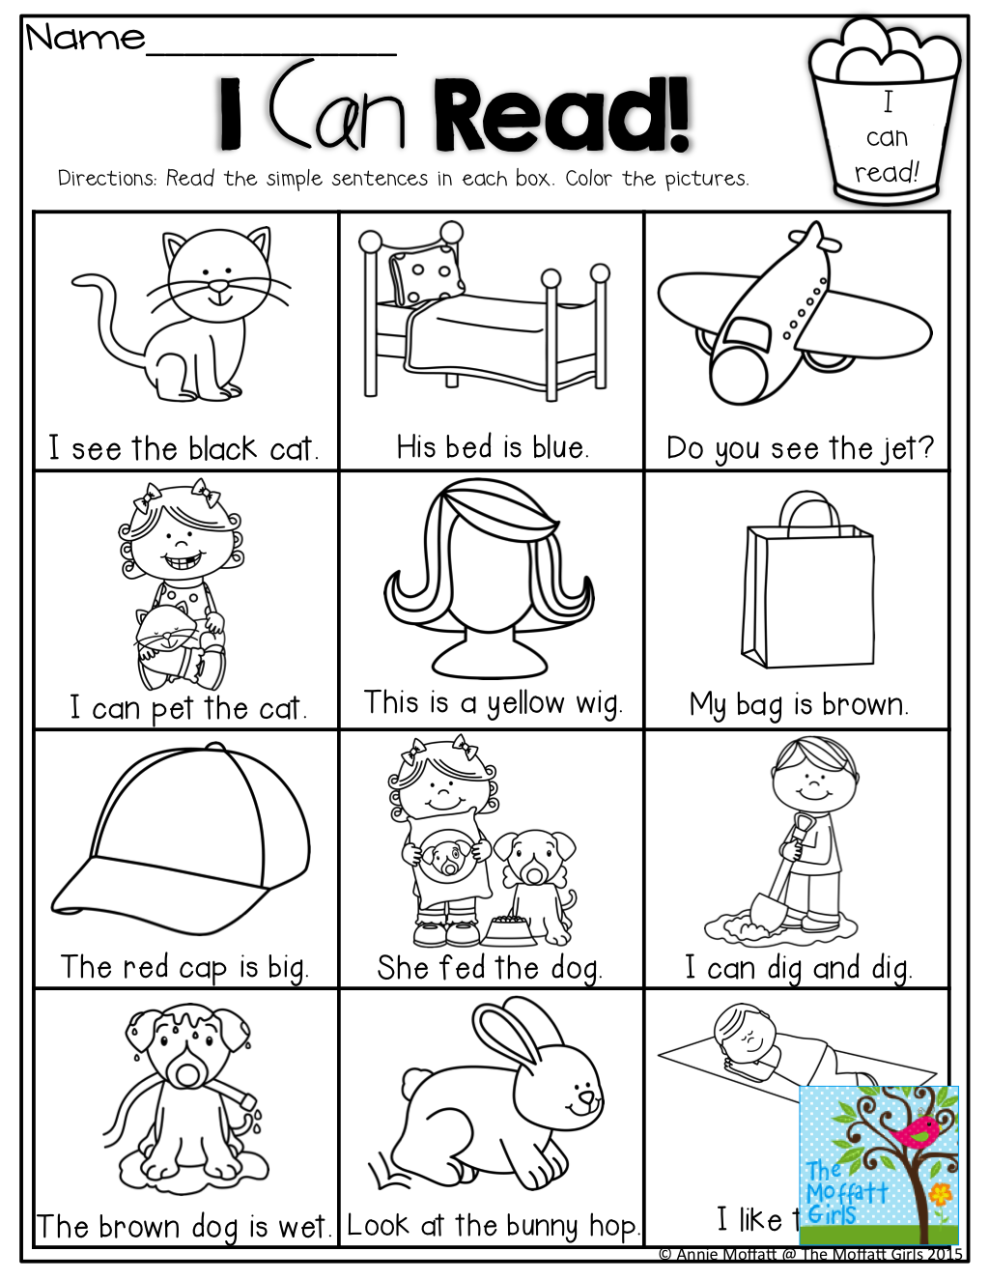 I Can Read! Simple sentences that kids can decode with sight words, CVC